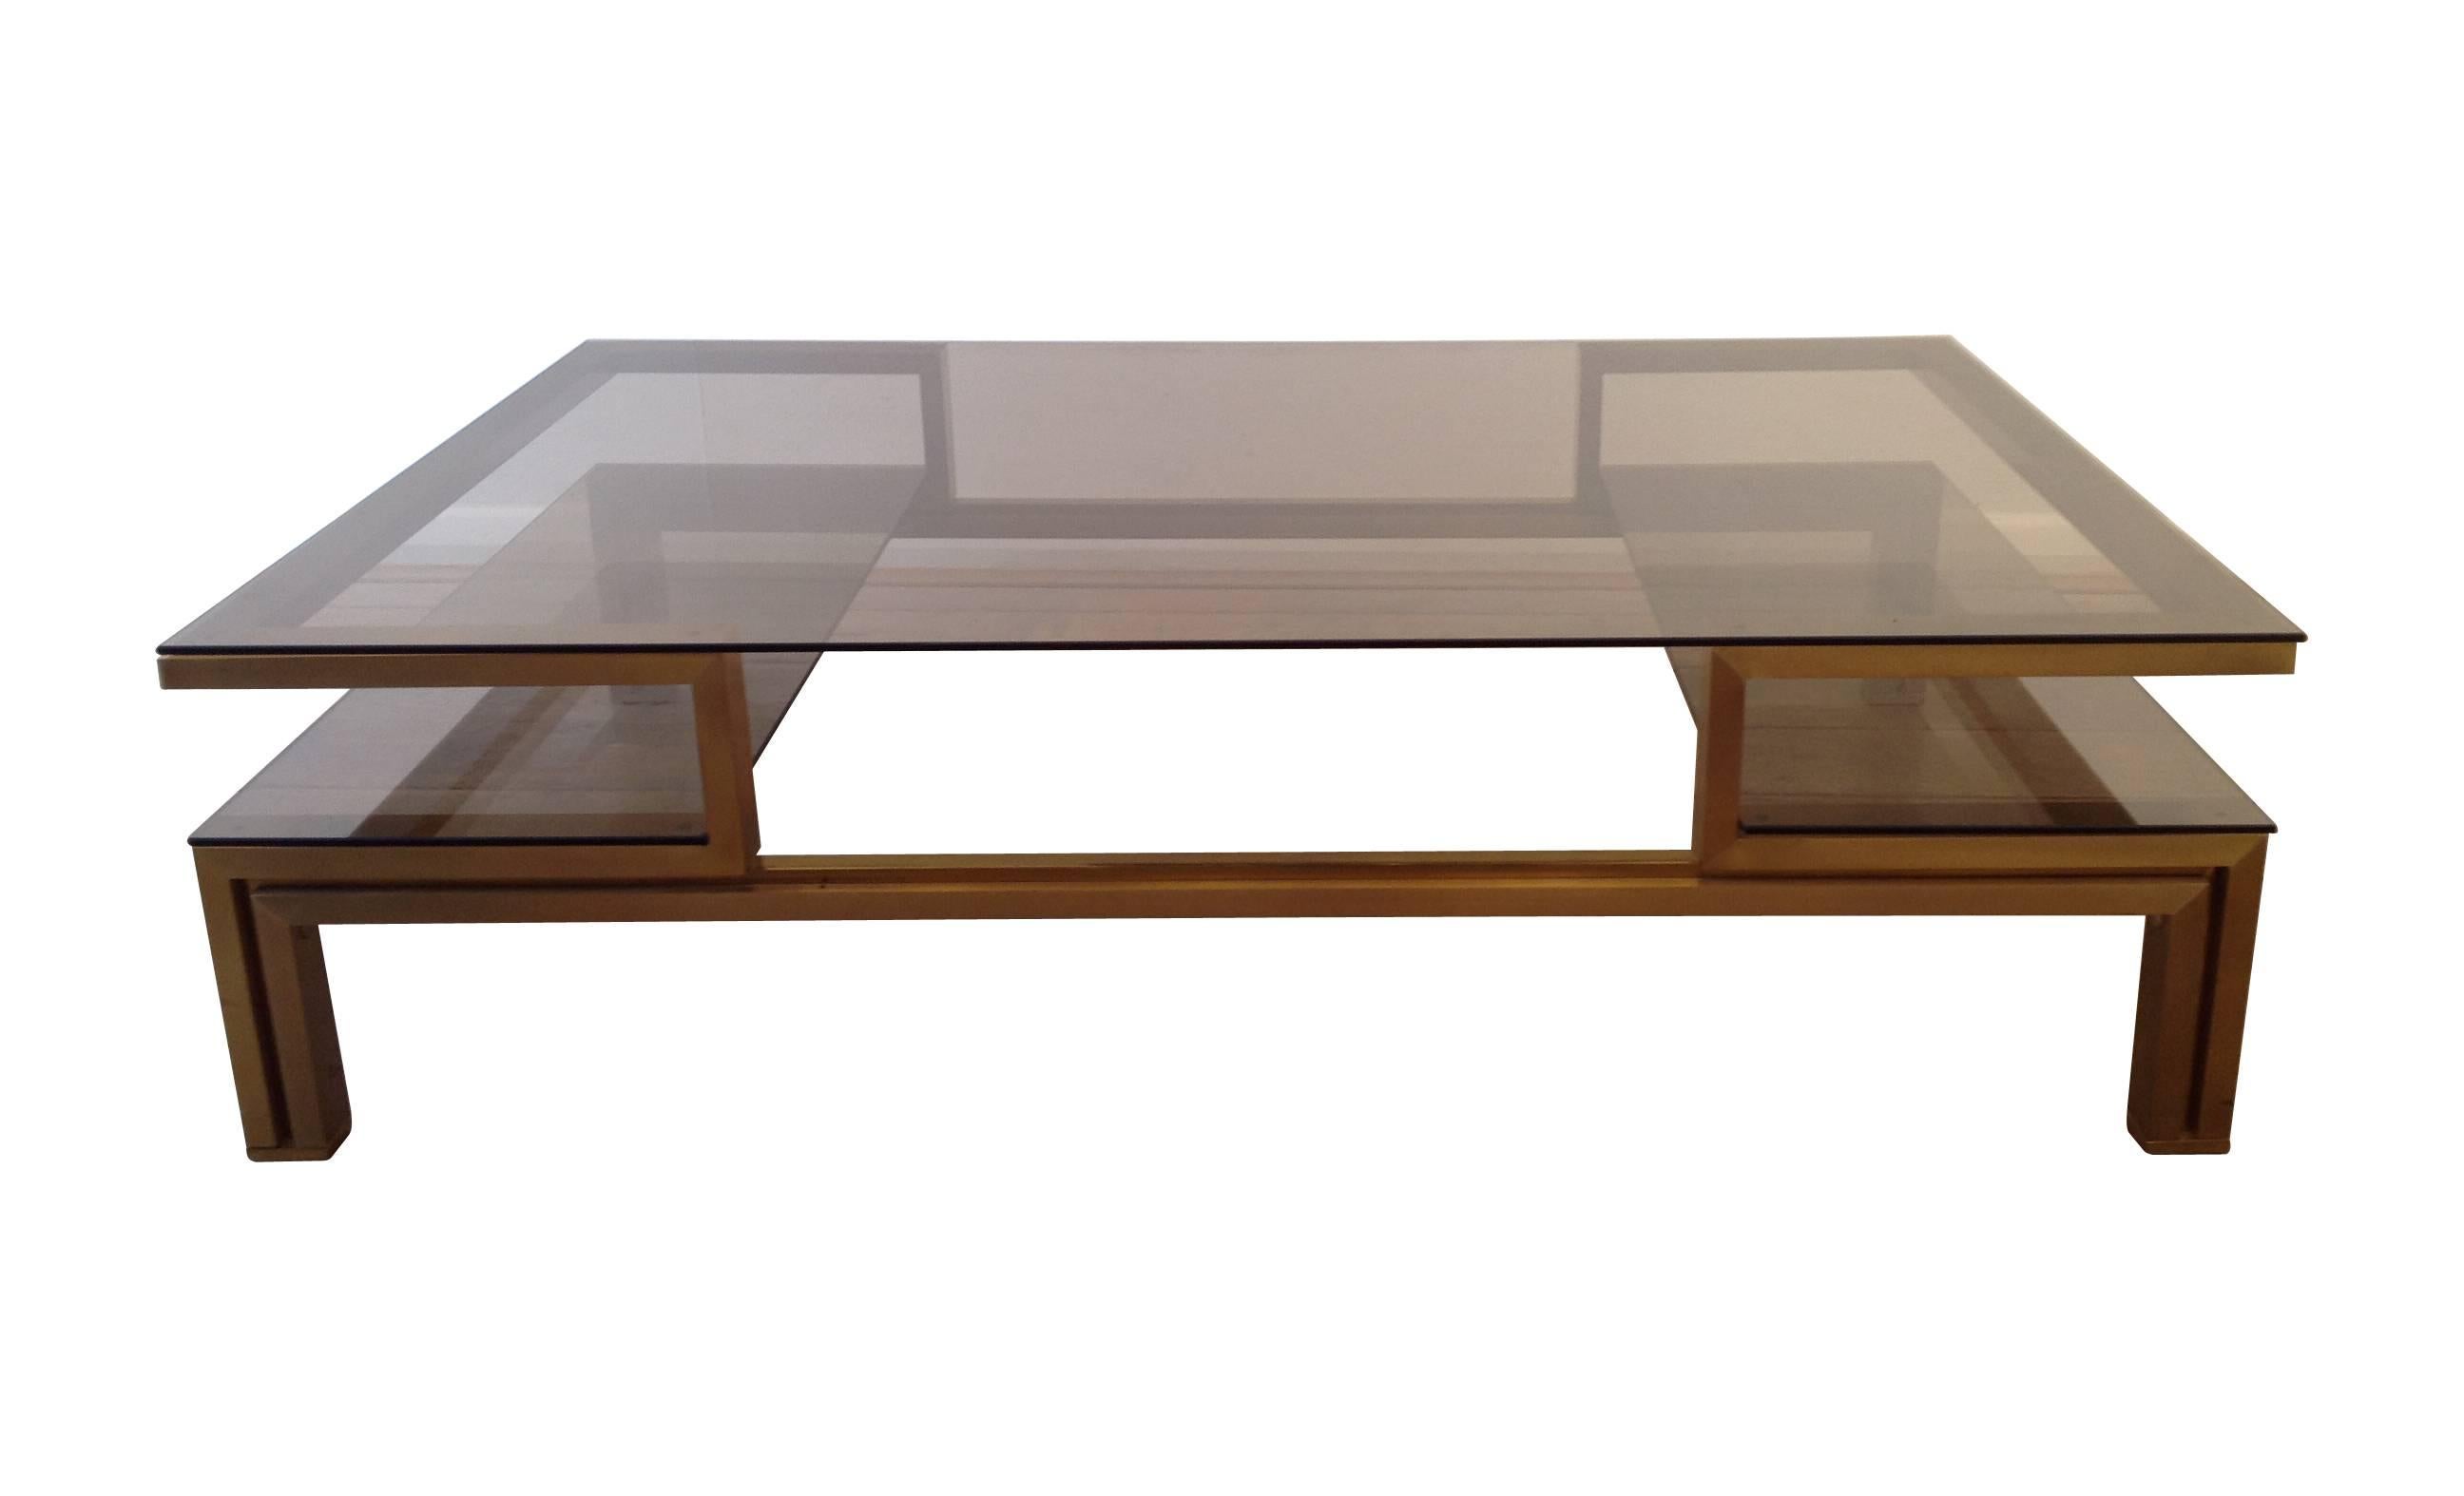 A Guy Lefevre gilt metal and brass coffee table, with smoke glass top and side shelves.